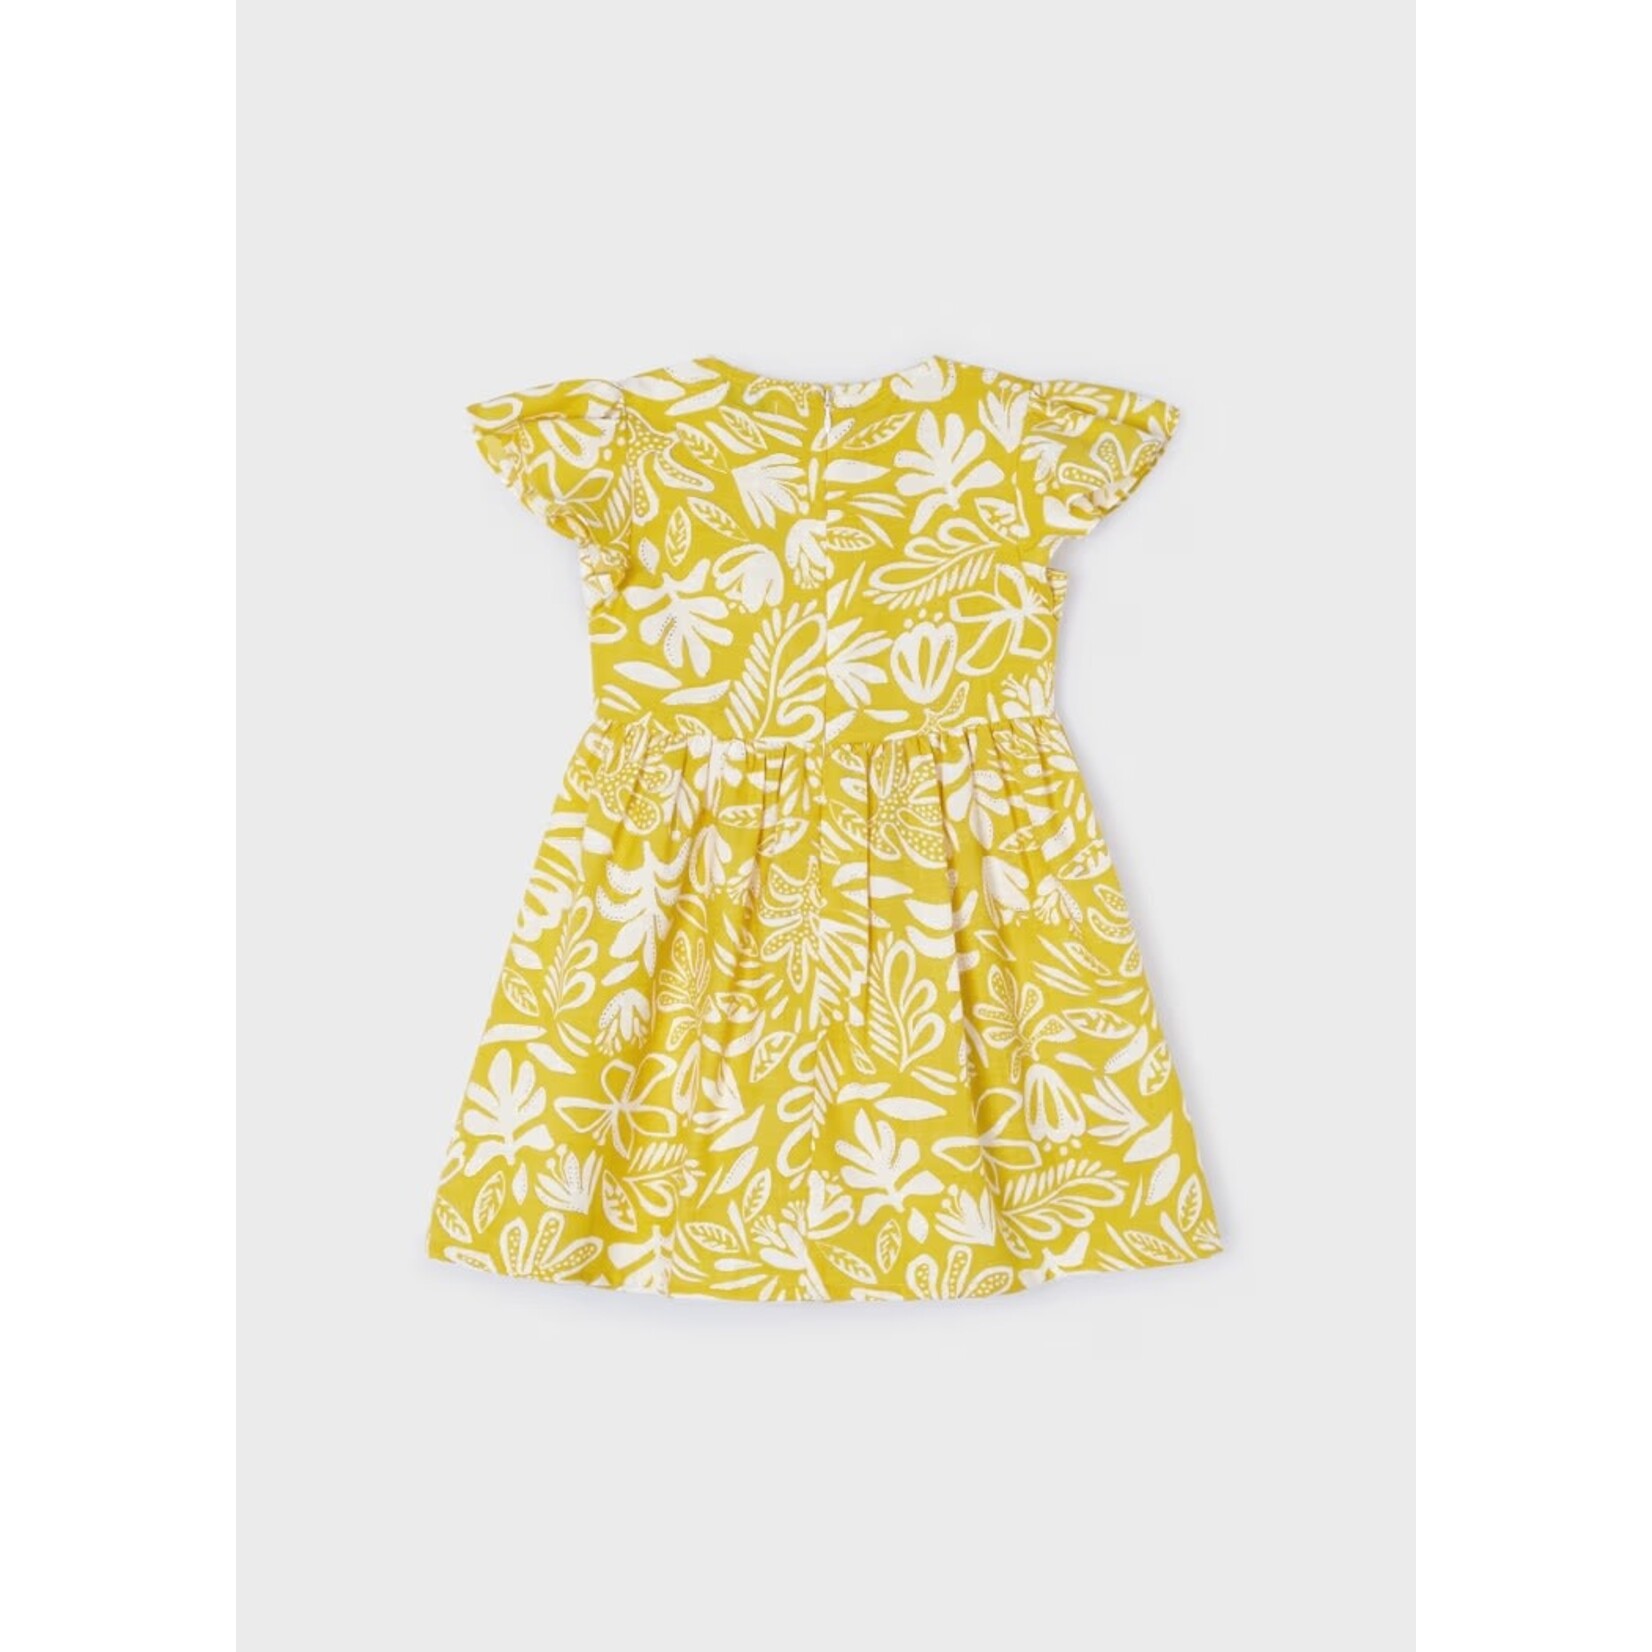 Mayoral MAYORAL - Mustard yellow sleeveless ruffled dress with white and gold flower print